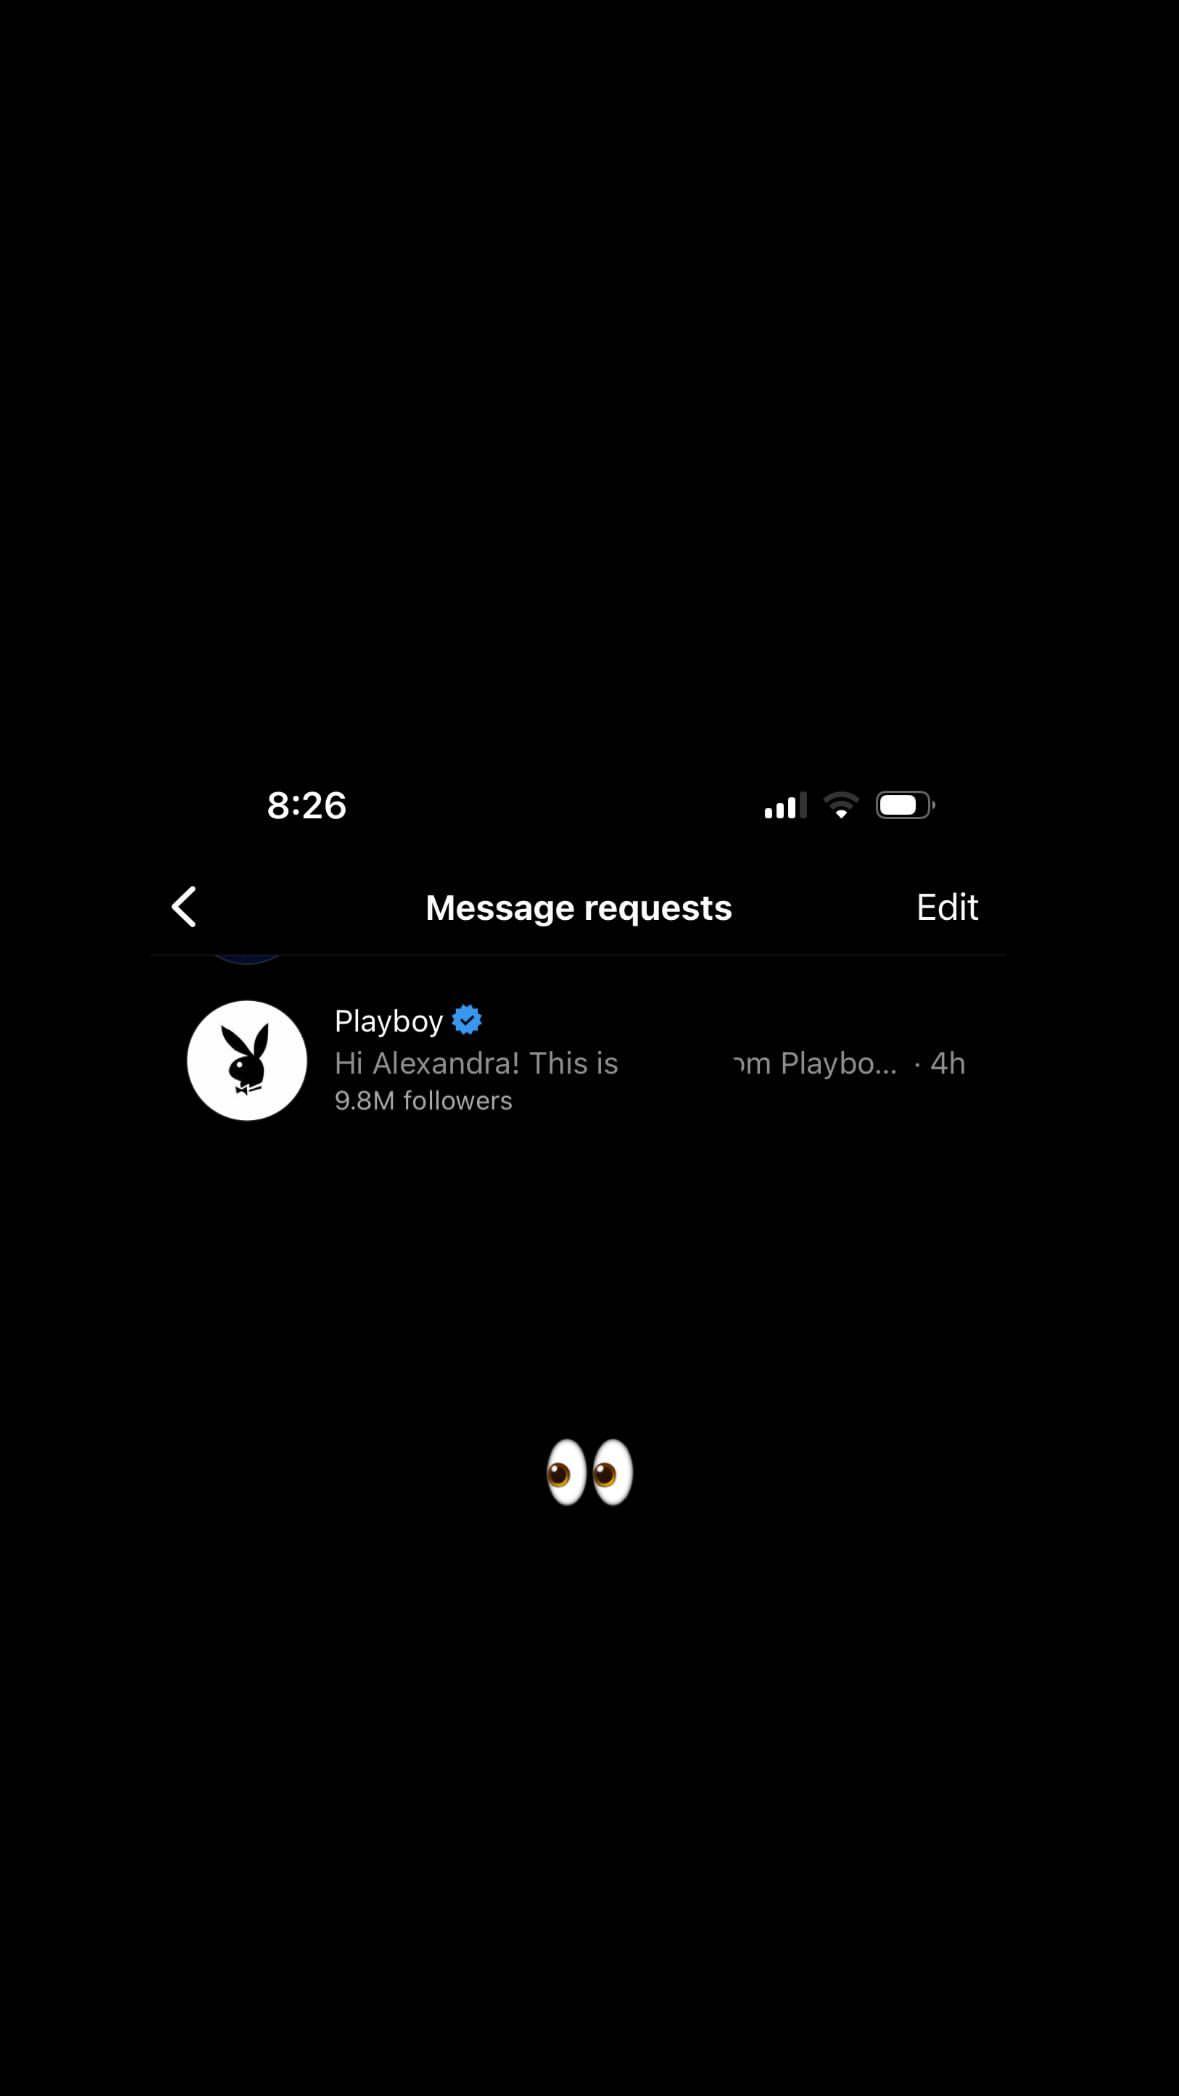 Alexandra Ianculescu getting a message from Playboy on Instagram.